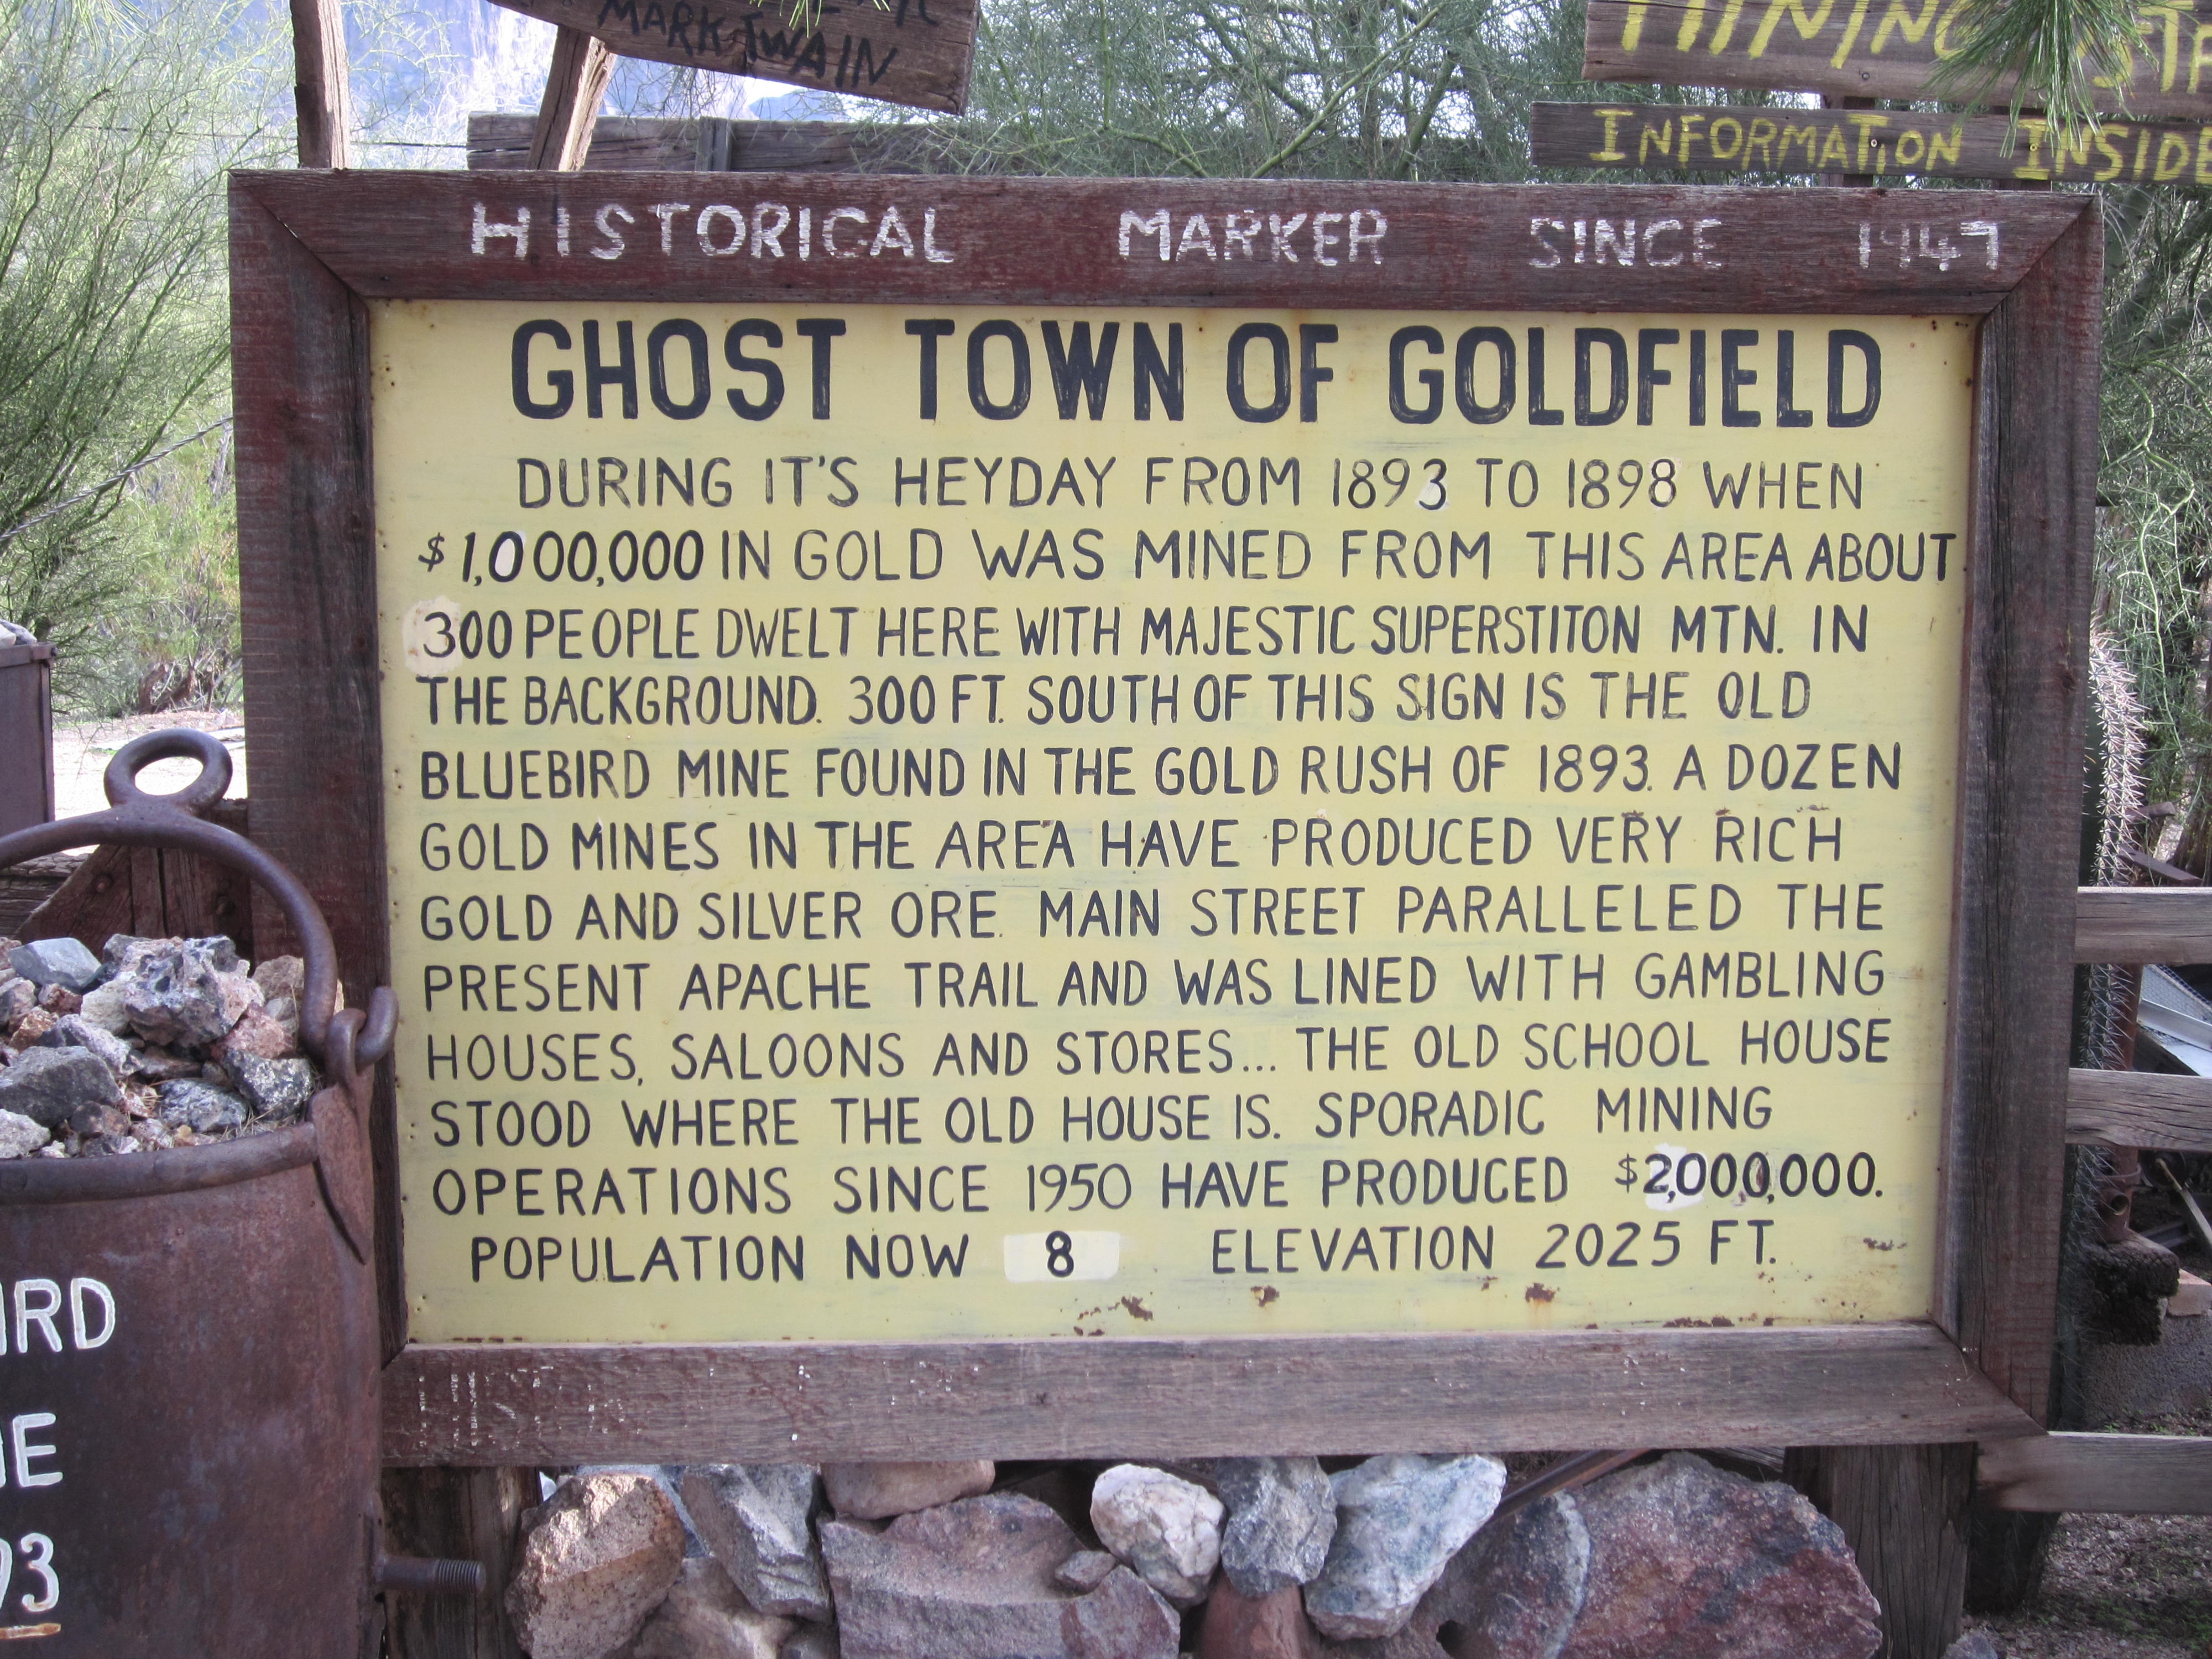 Ghost Town of Goldfield Marker